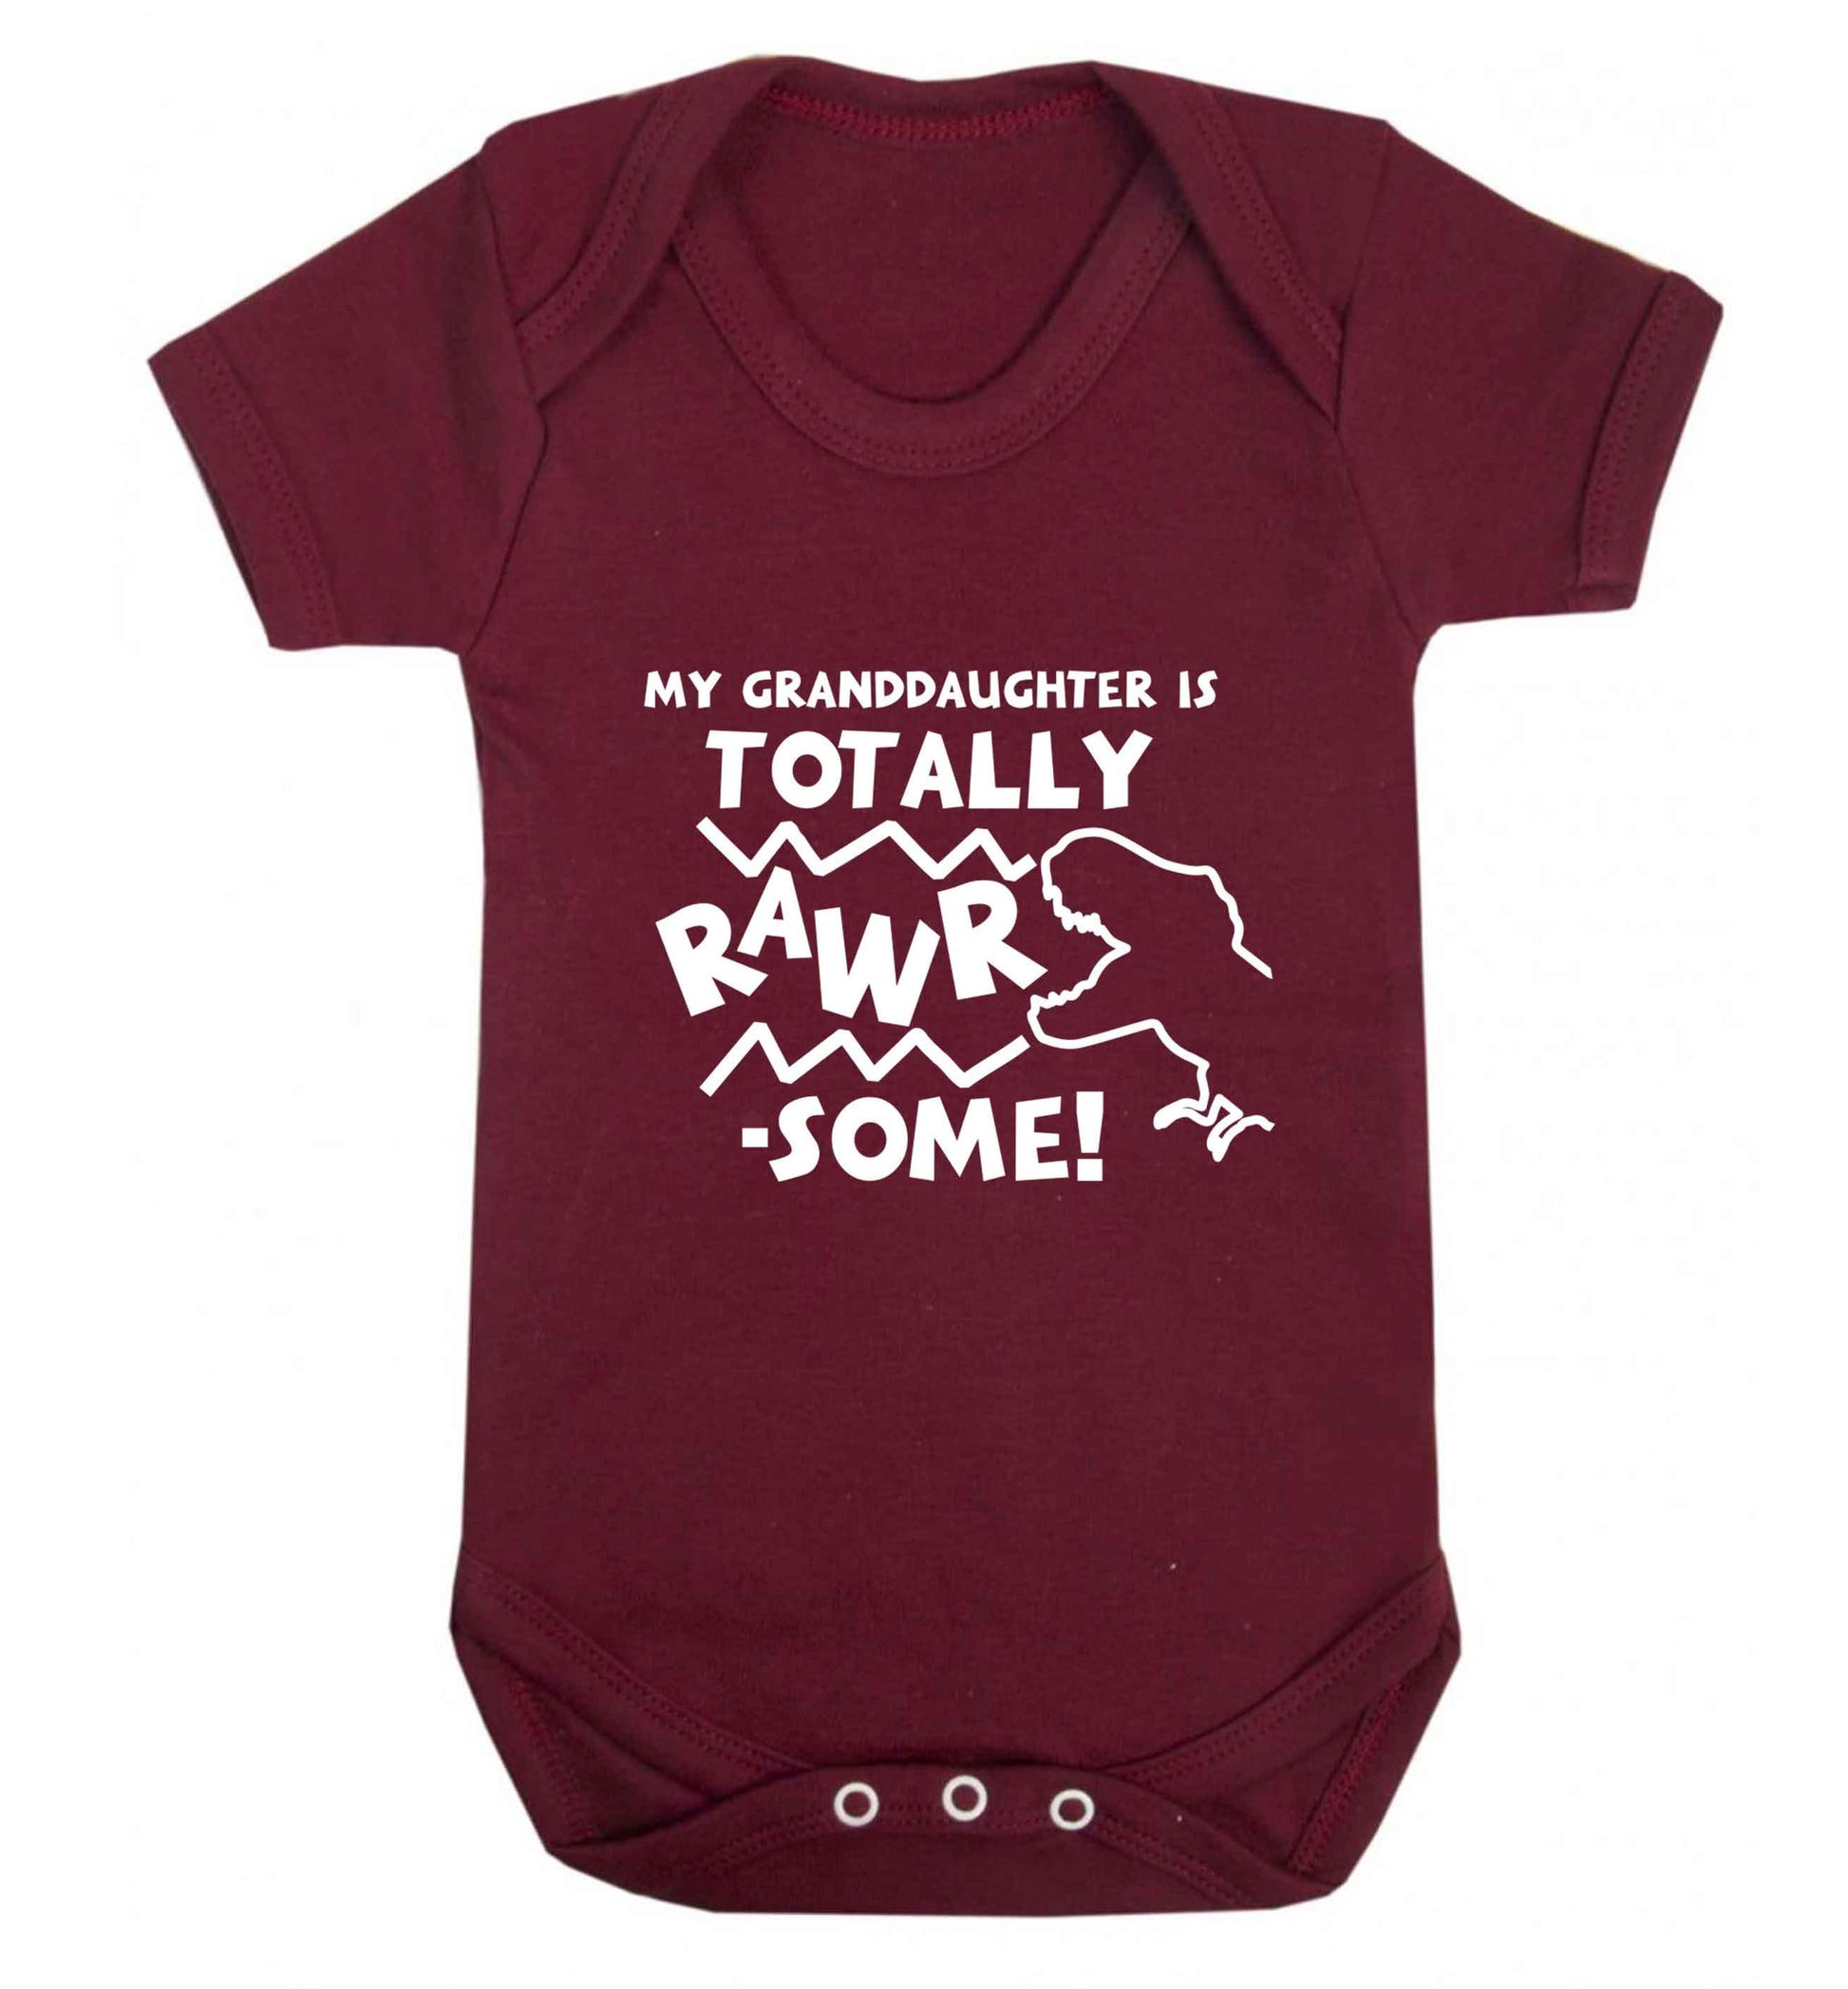 My granddaughter is totally rawrsome baby vest maroon 18-24 months